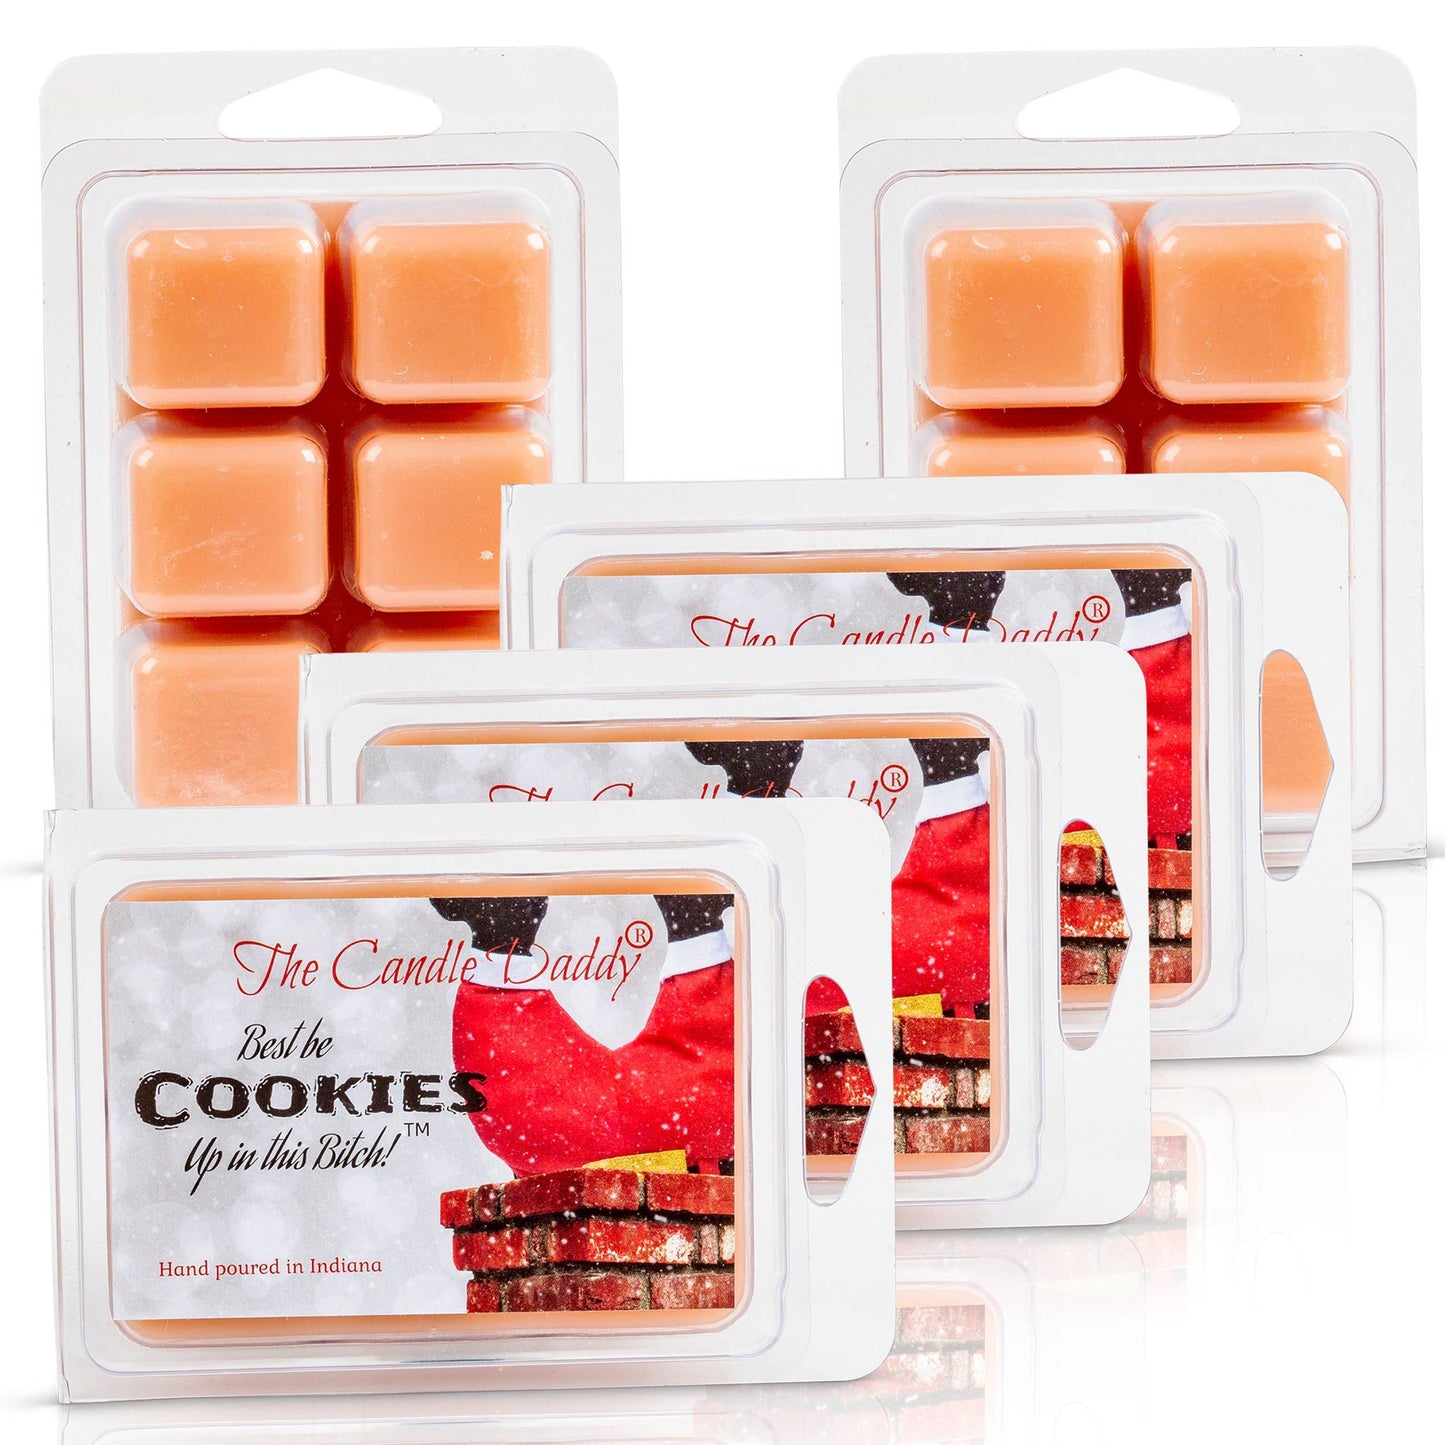 Wax Melts: Best Be Cookies Up in This Bitch - Snickerdoodle (2 oz)